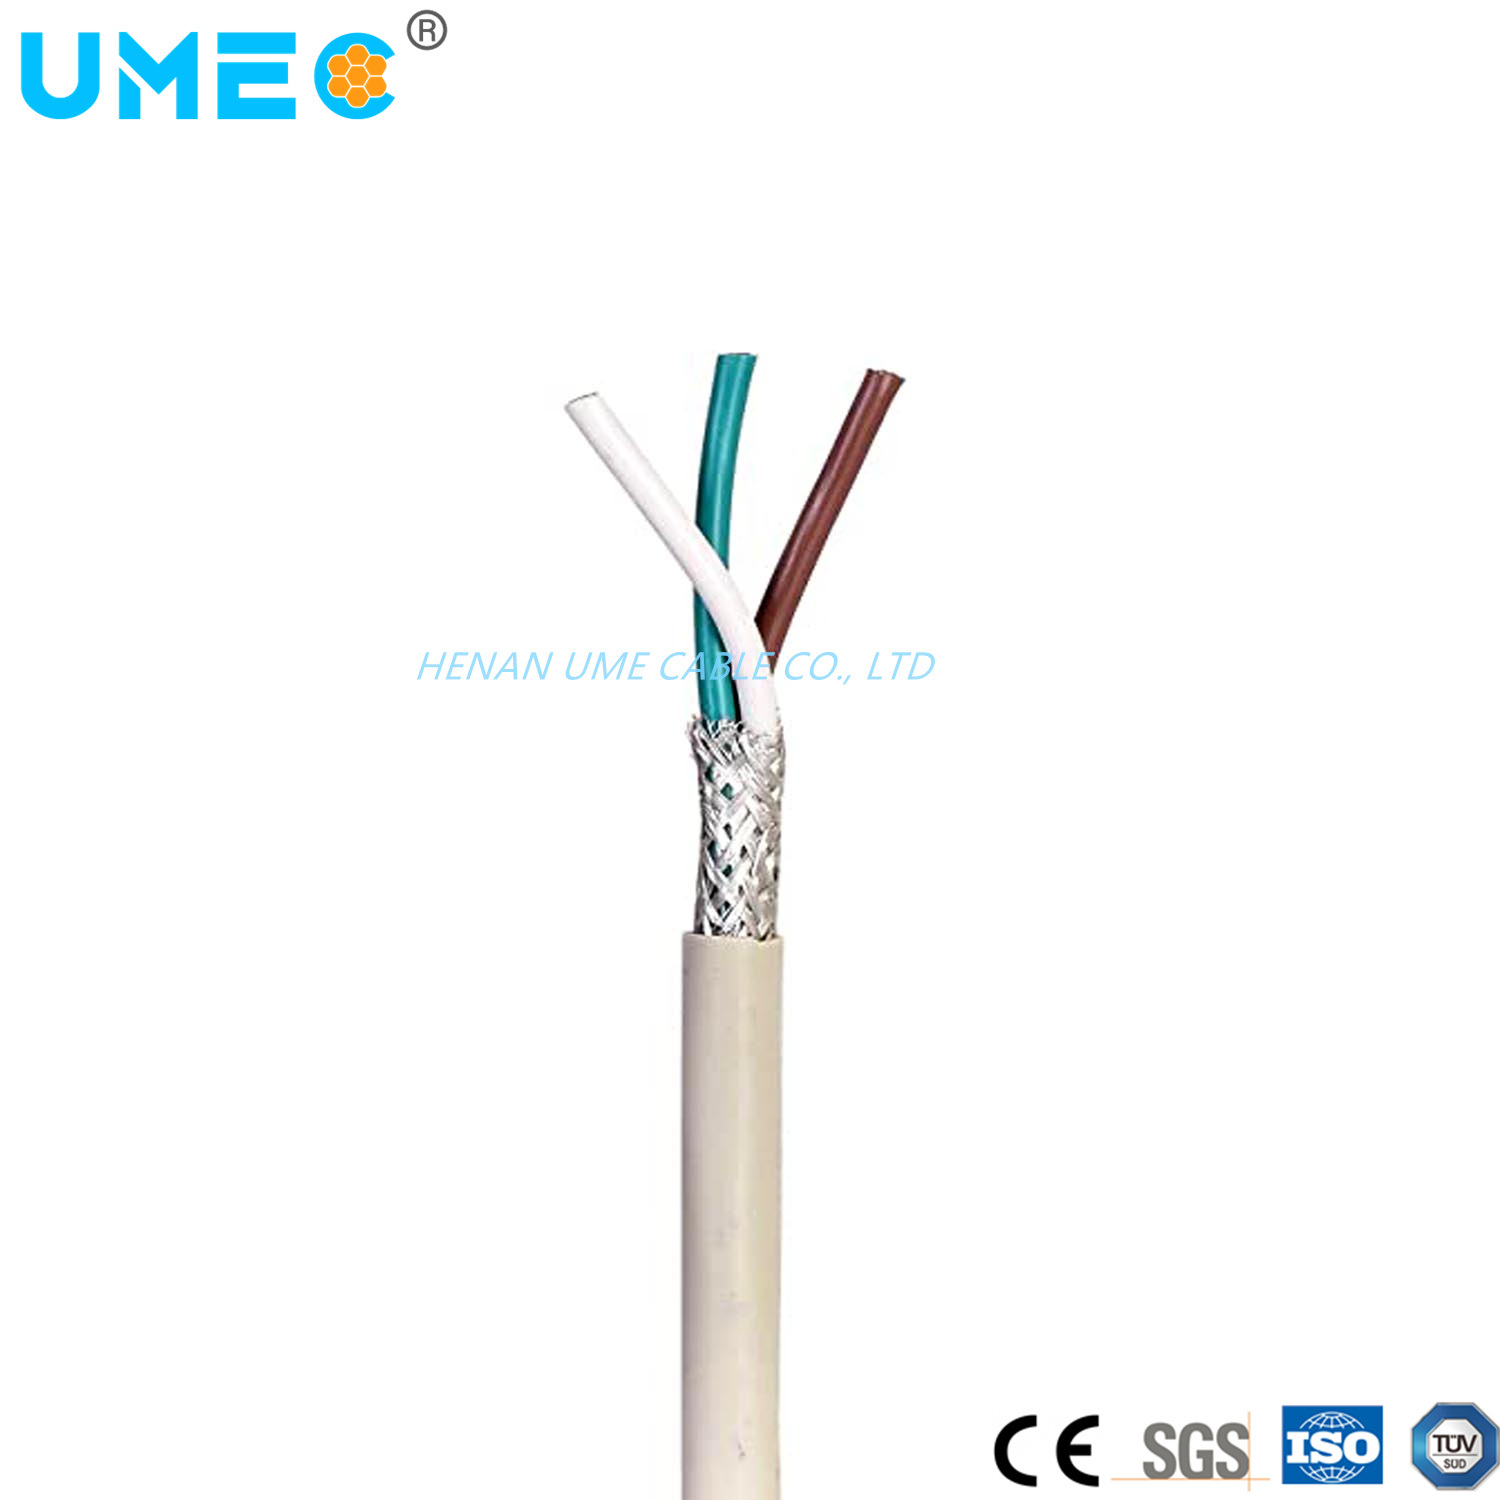 
                Liycy Shielding Control Cable Industrial Cables Liycy Cable
            